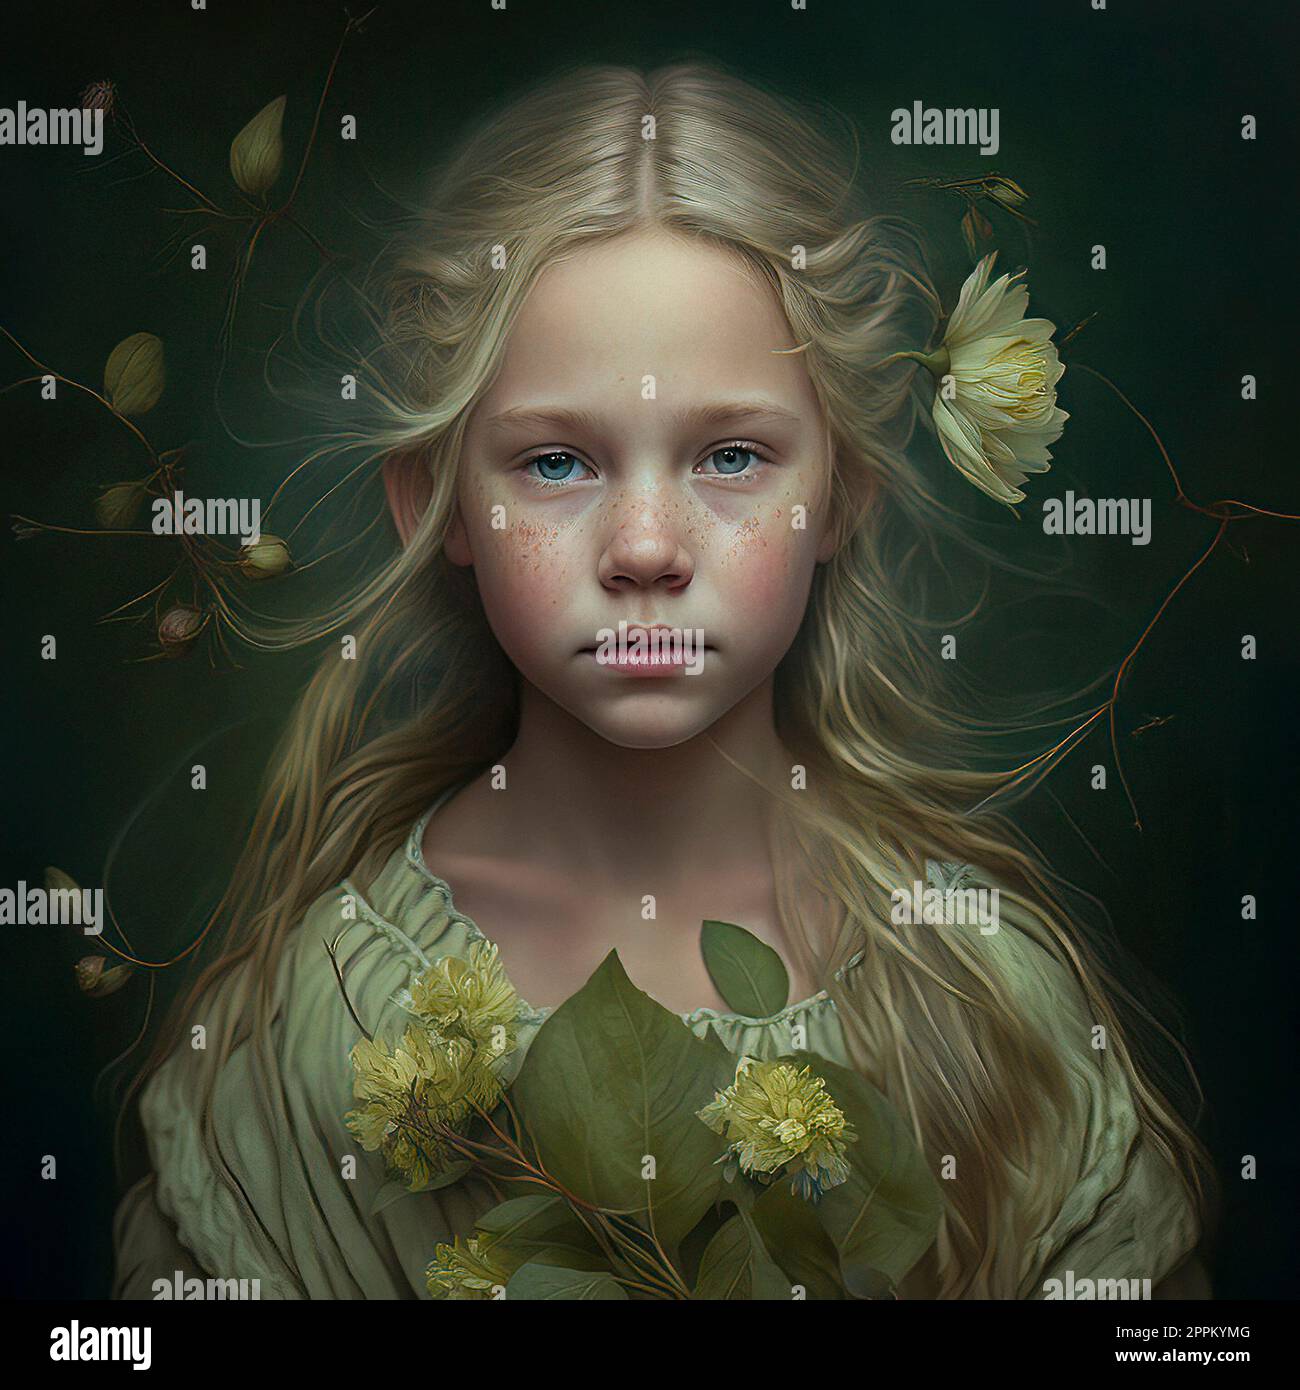 Digital Art Portrait of a Young Nordic Girl with a Flower in Her Hair, and a Pale Green Dress Stock Photo